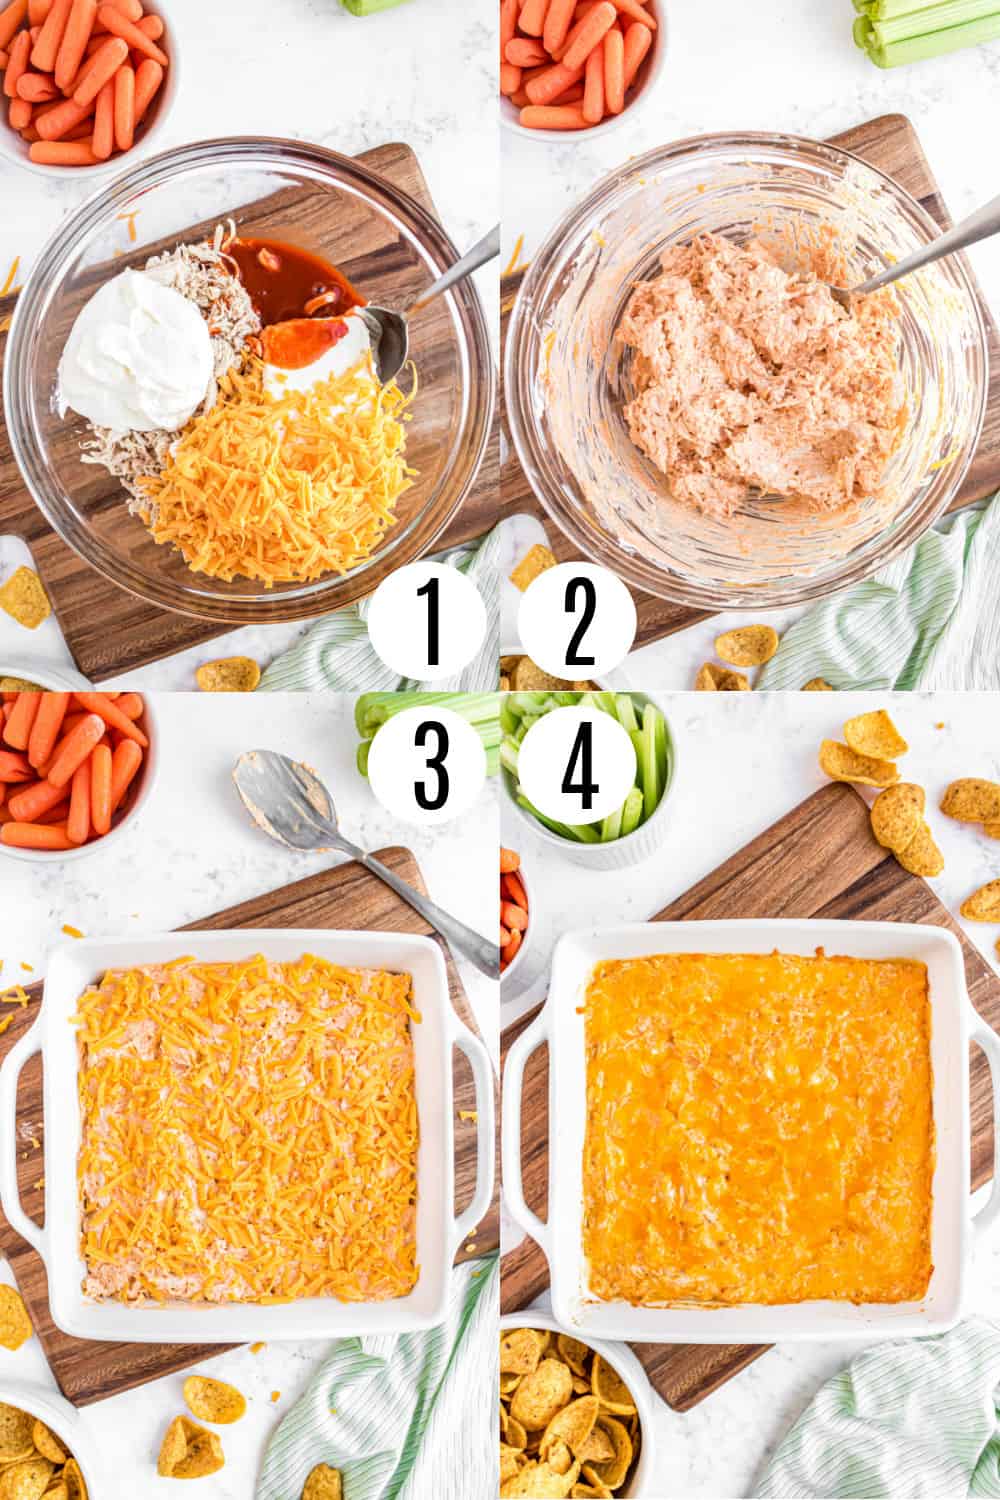 Step by step photos showing how to make buffalo chicken dip.